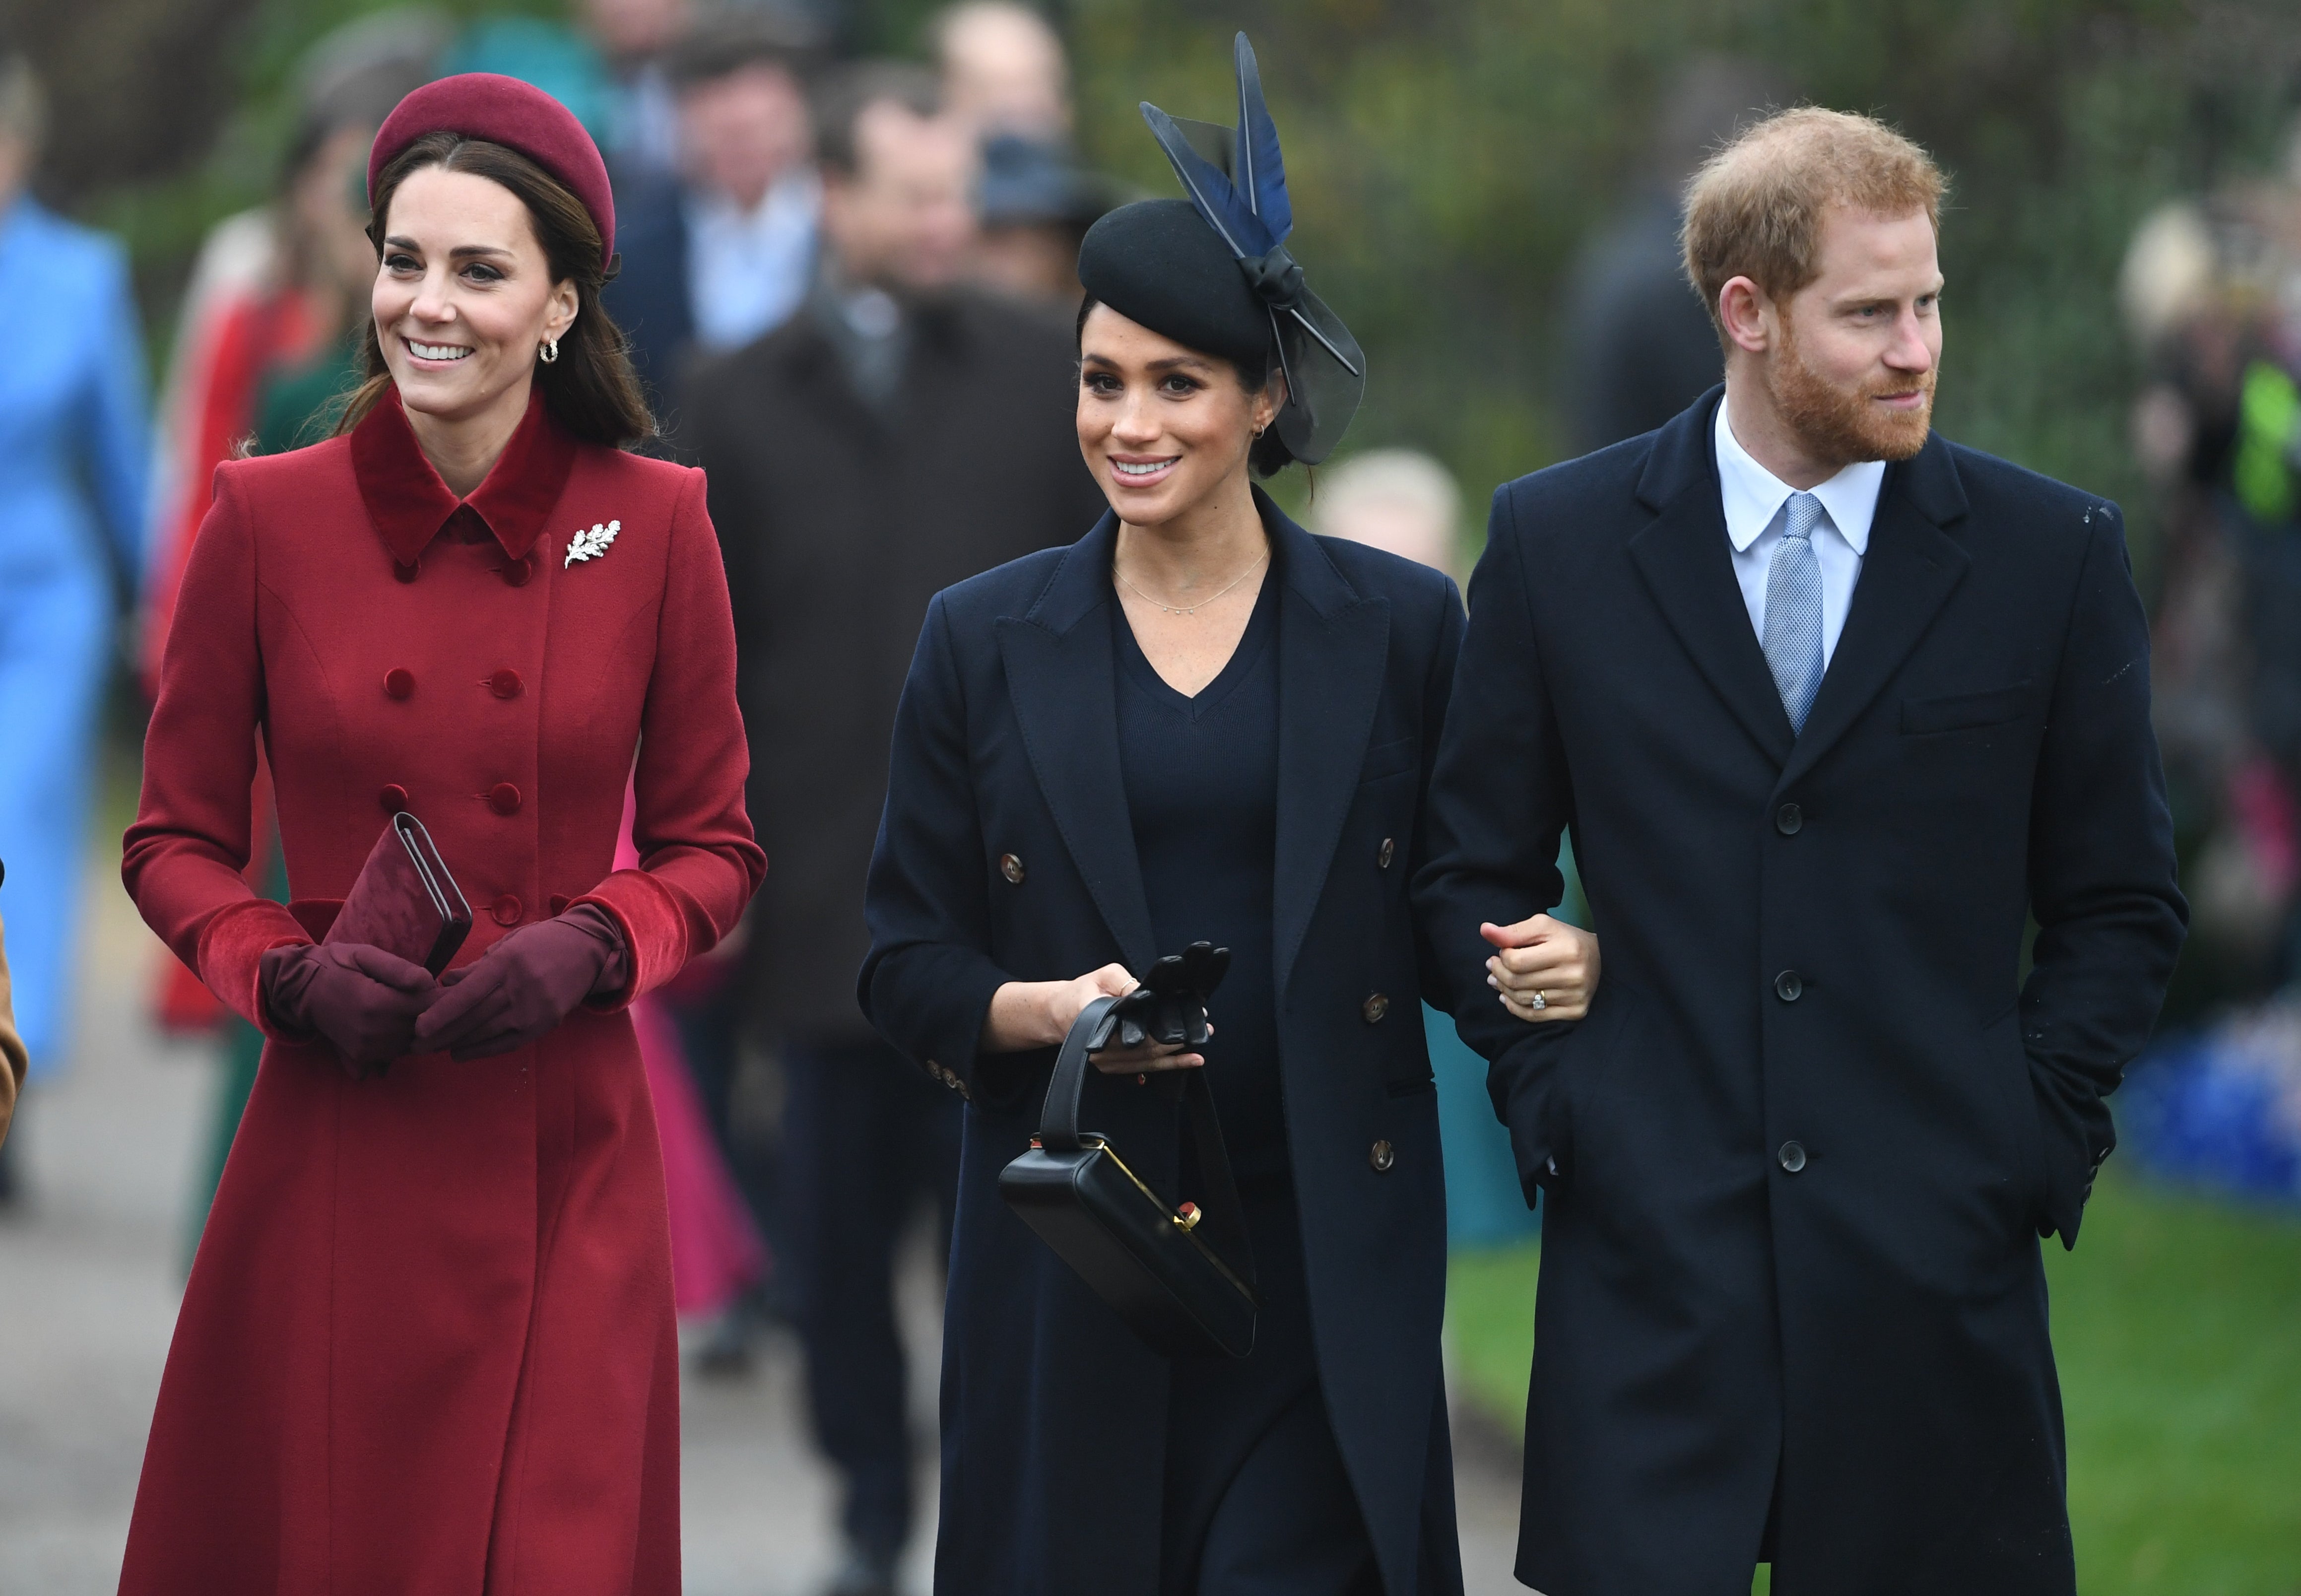 The Princess of Wales walks side by side with Harry and Megan